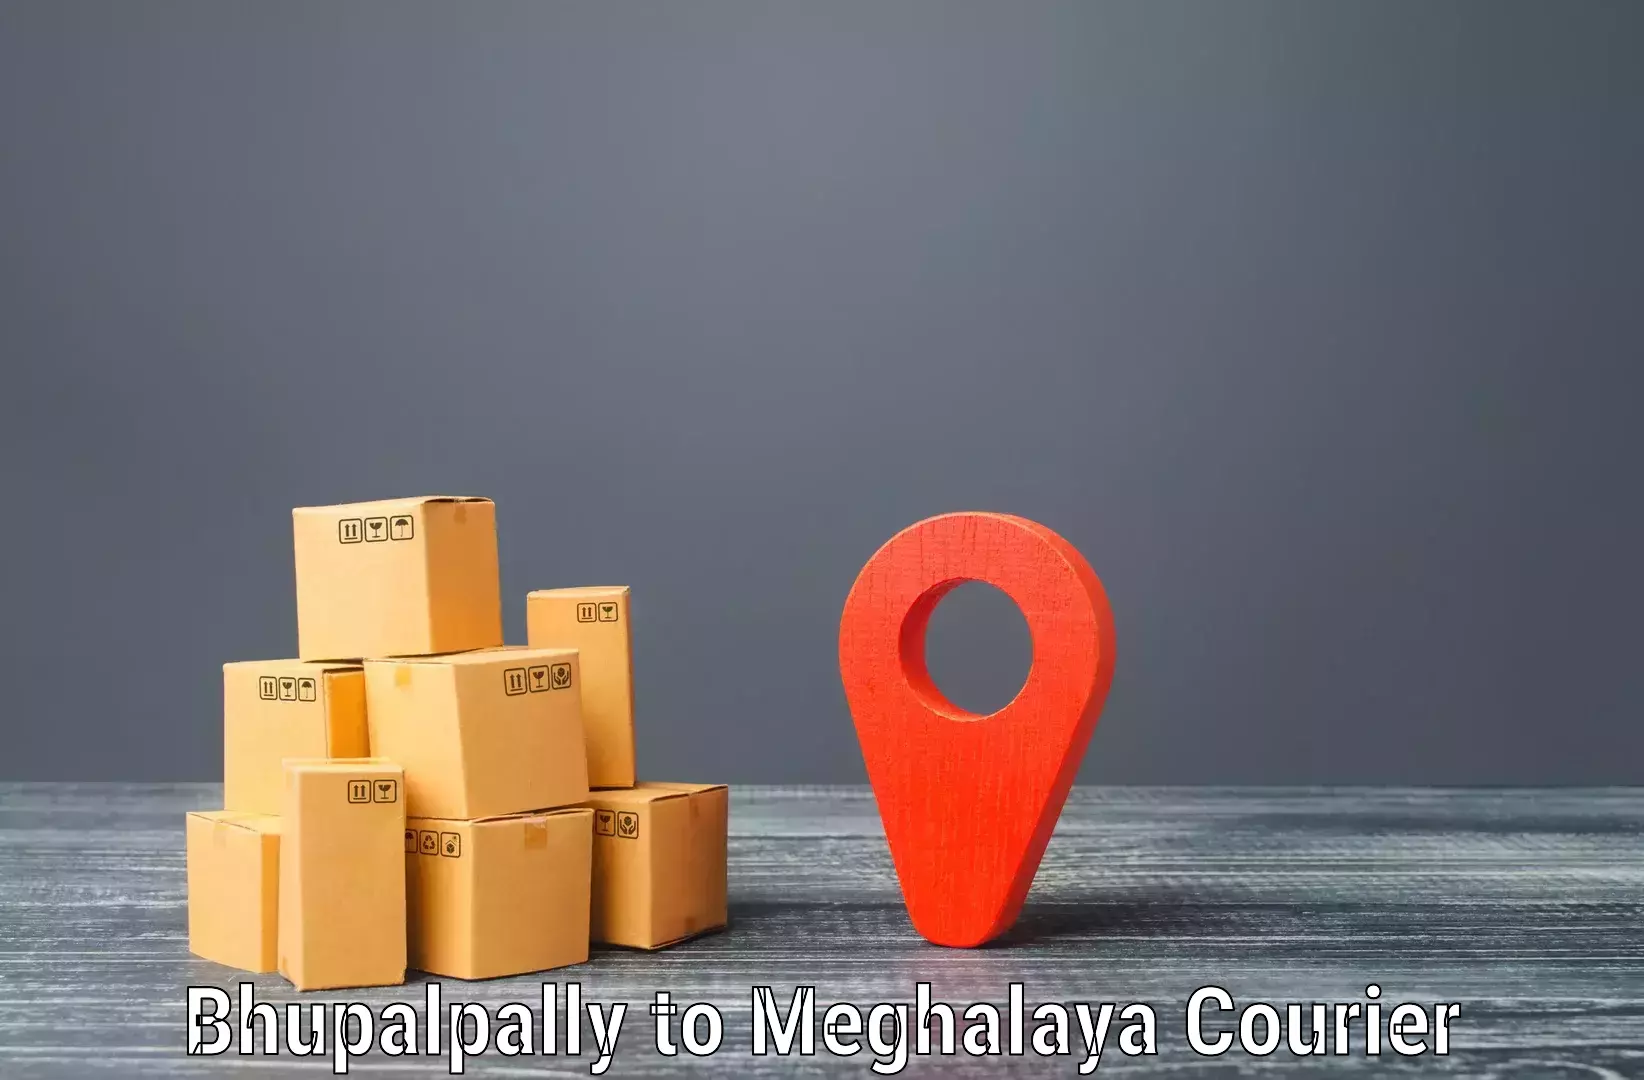 Courier service innovation Bhupalpally to Shillong